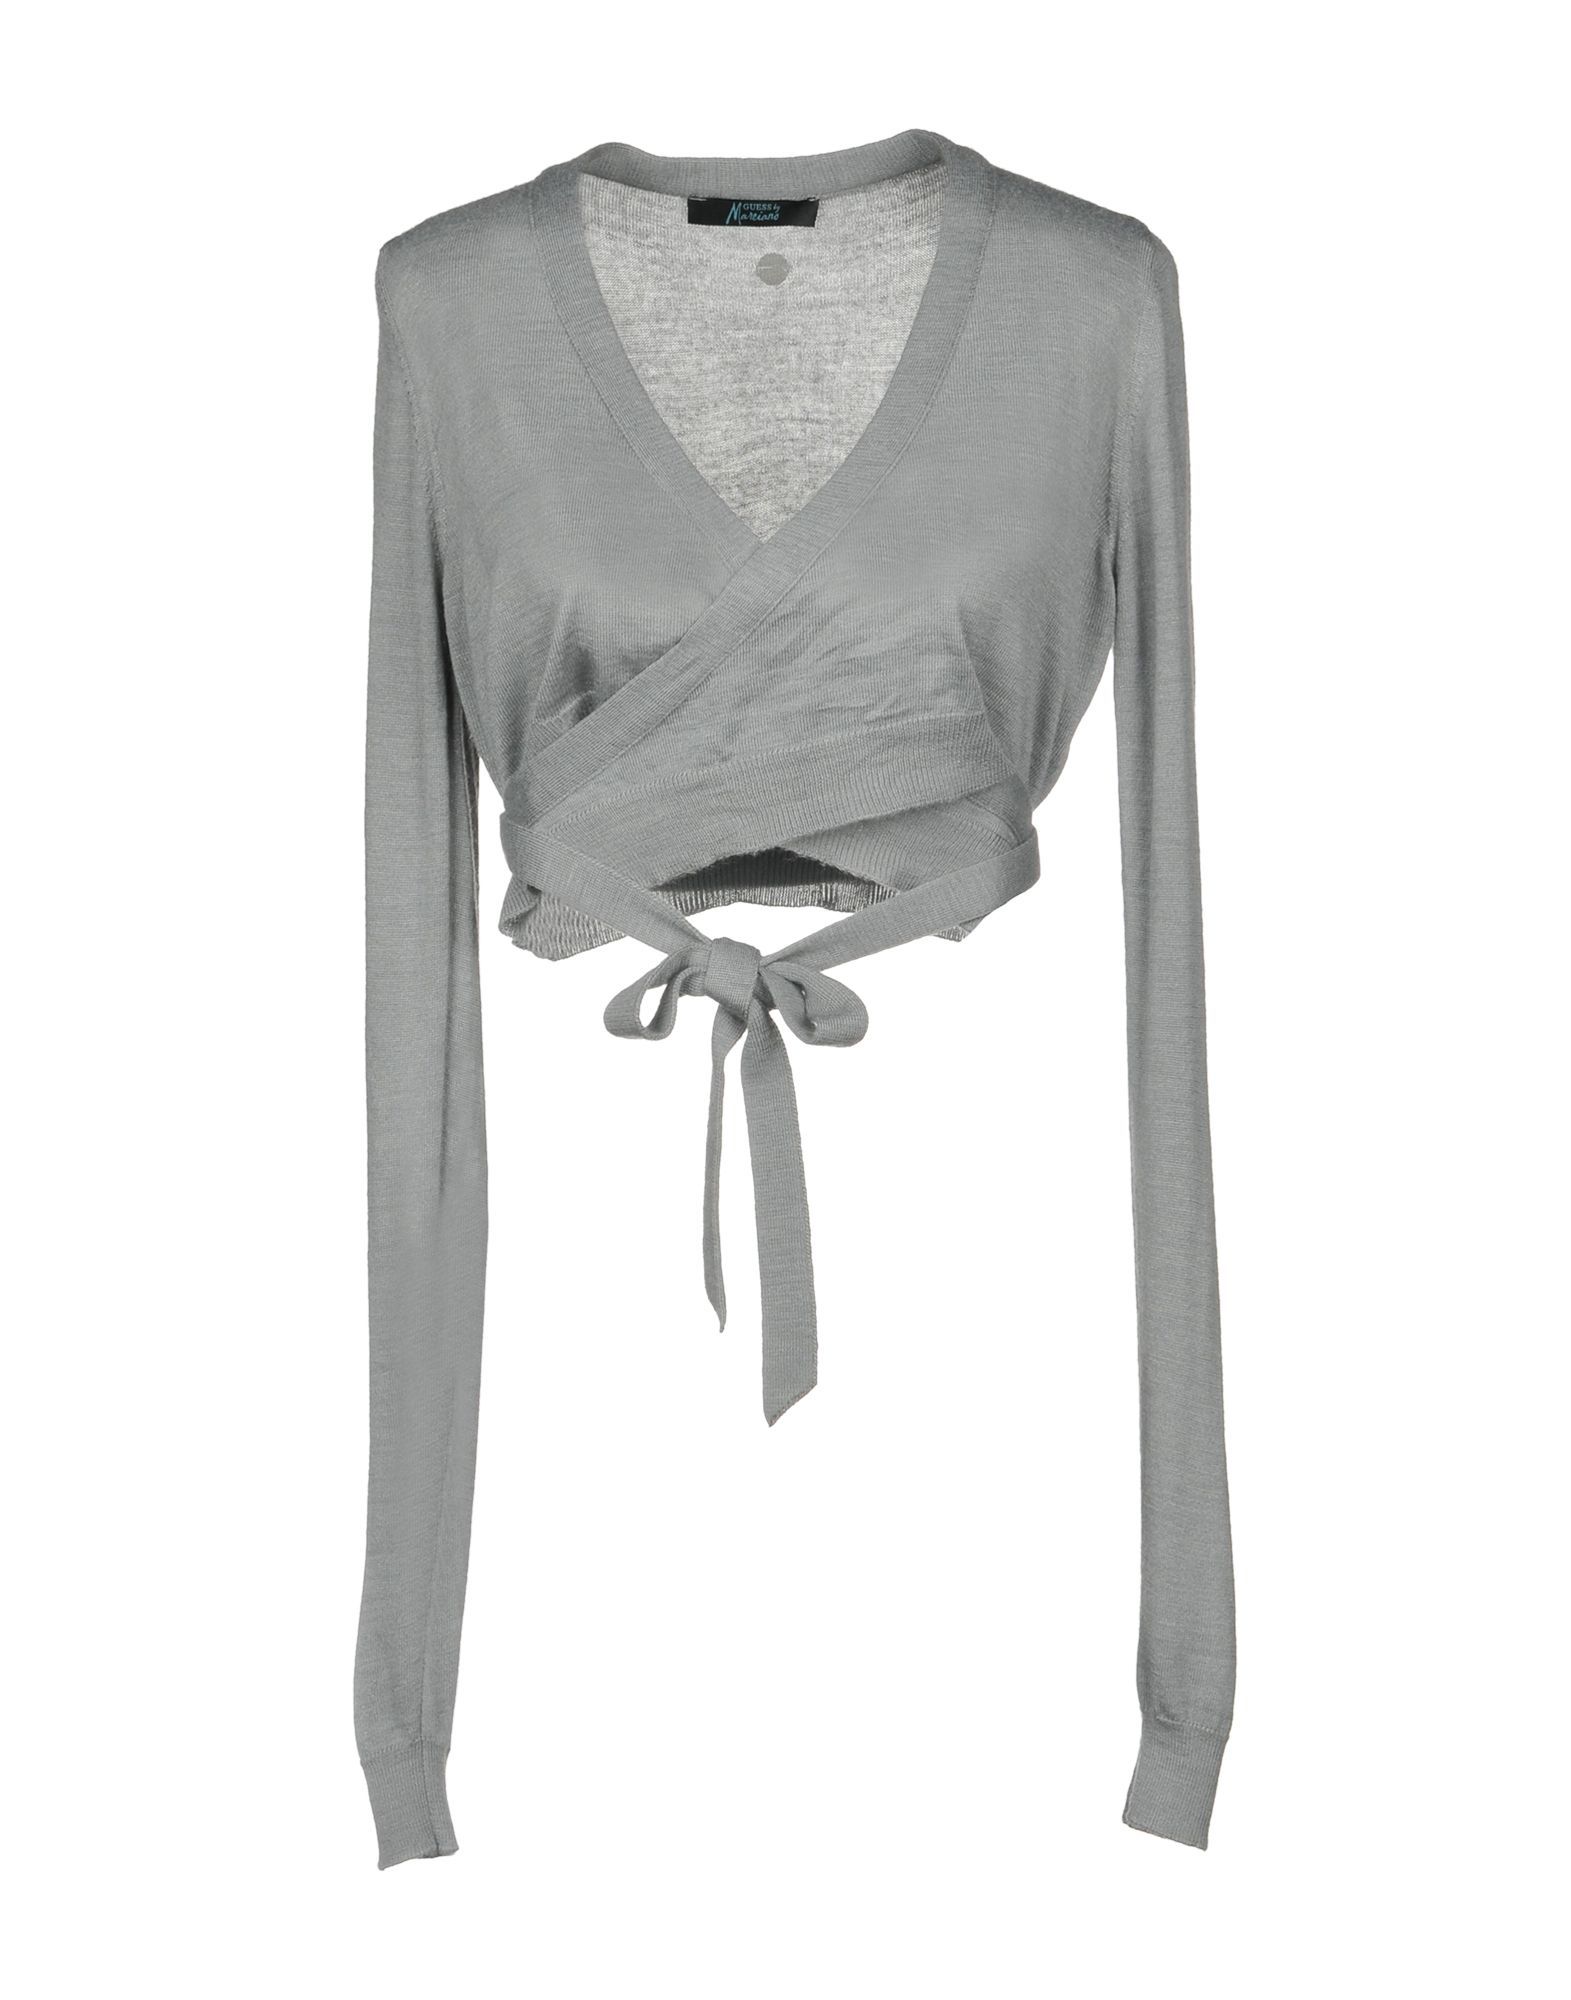 GUESS BY MARCIANO Wrap cardigans | YOOX (US)